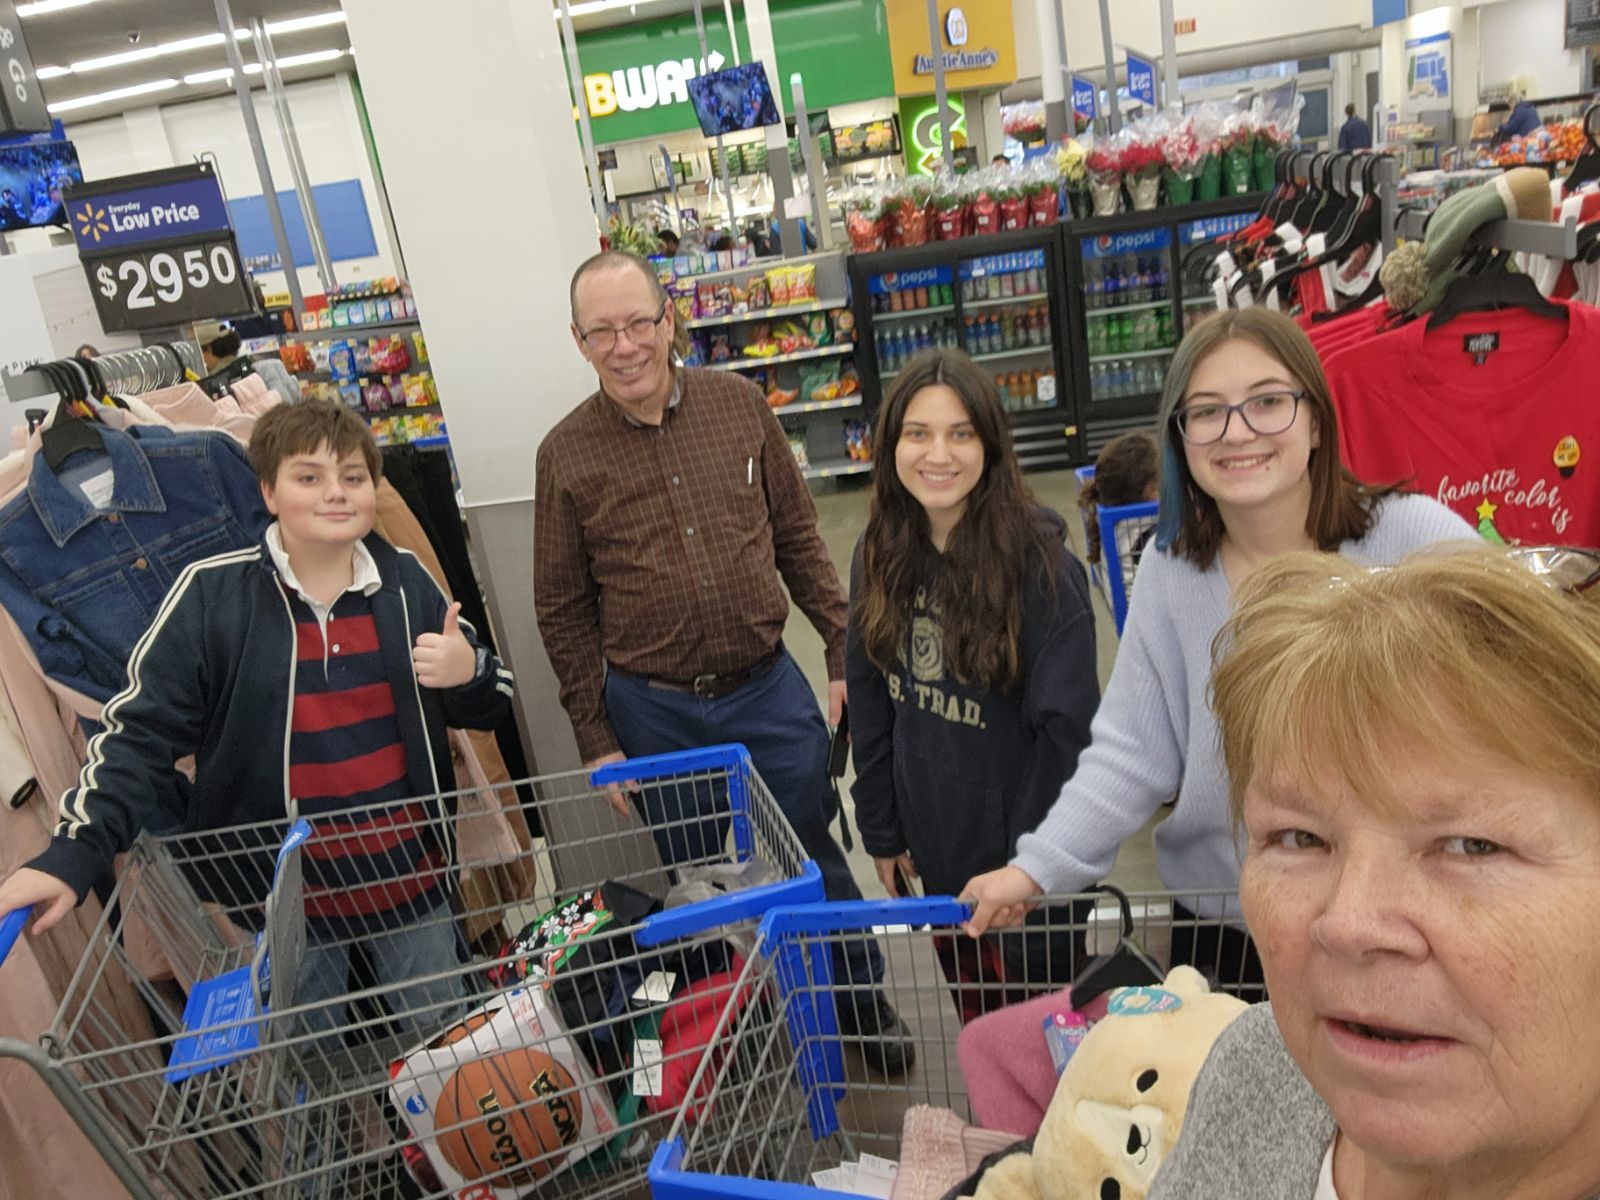 Youth Shop for Family in Need